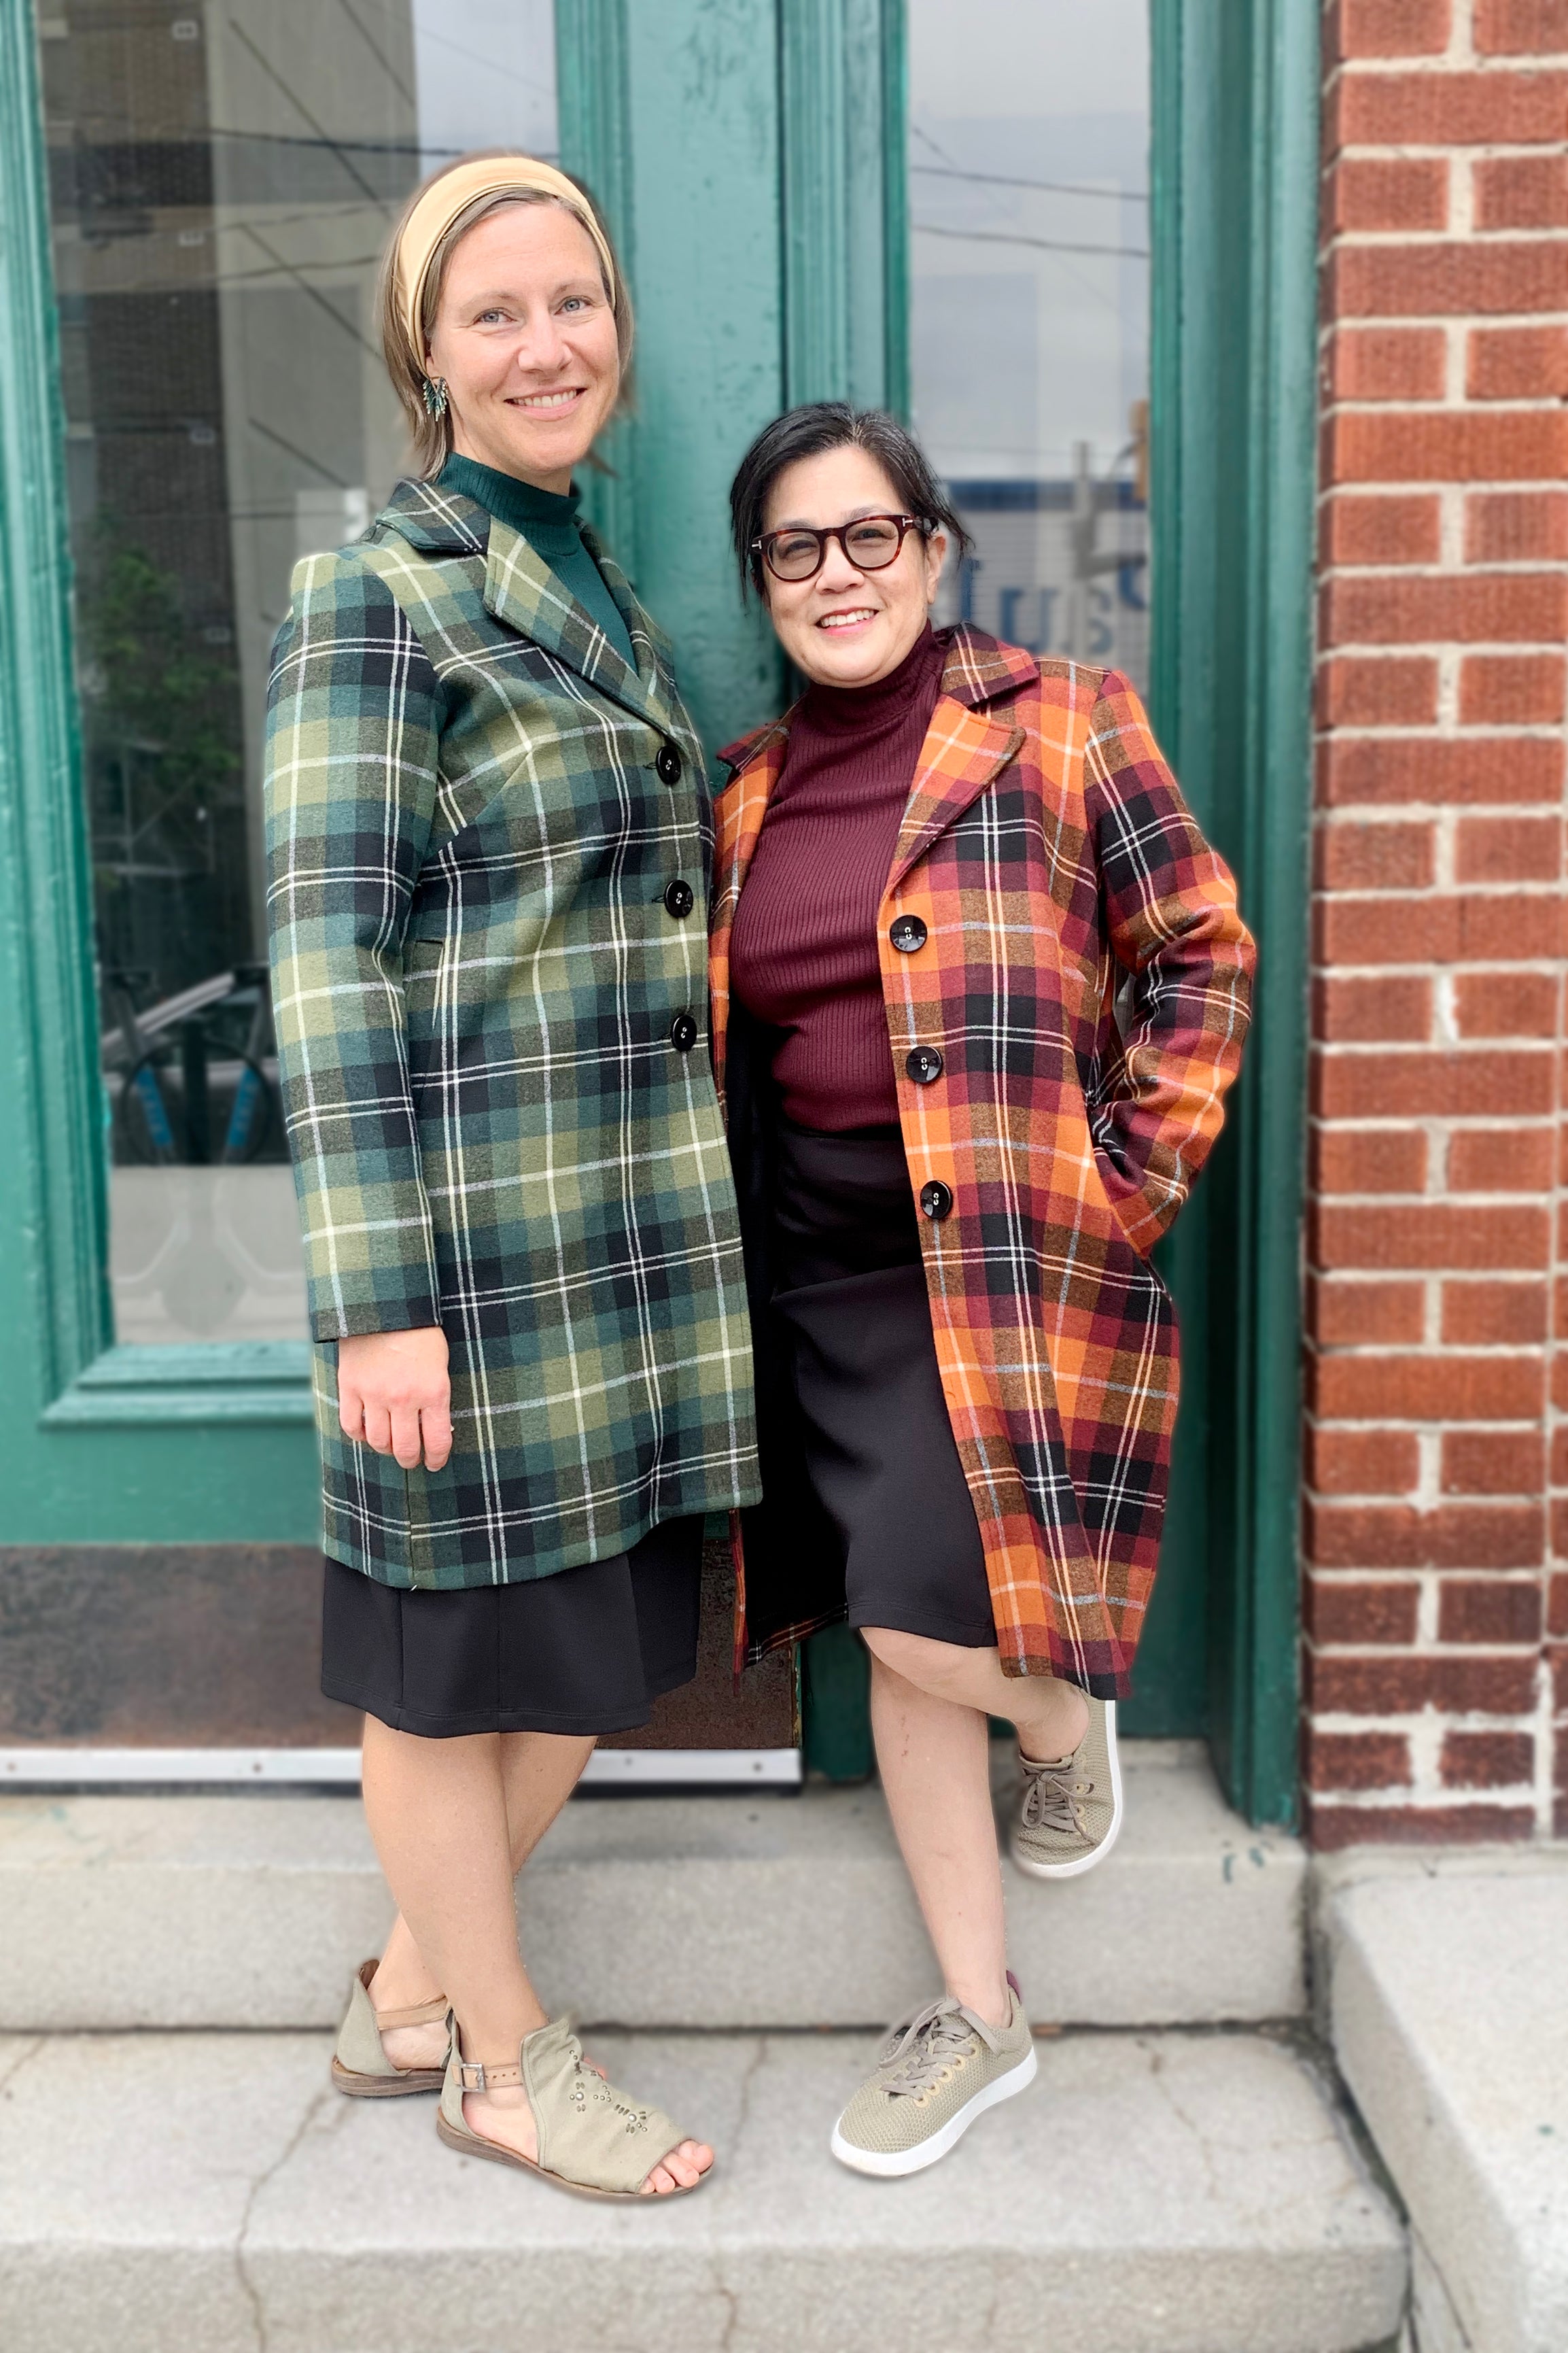 Sybille Coat by Luc Fontaine, Green and Orange plaids, wide lapels, buttons up the front, pockets, above the knee, sizes 4-16, made in Canada